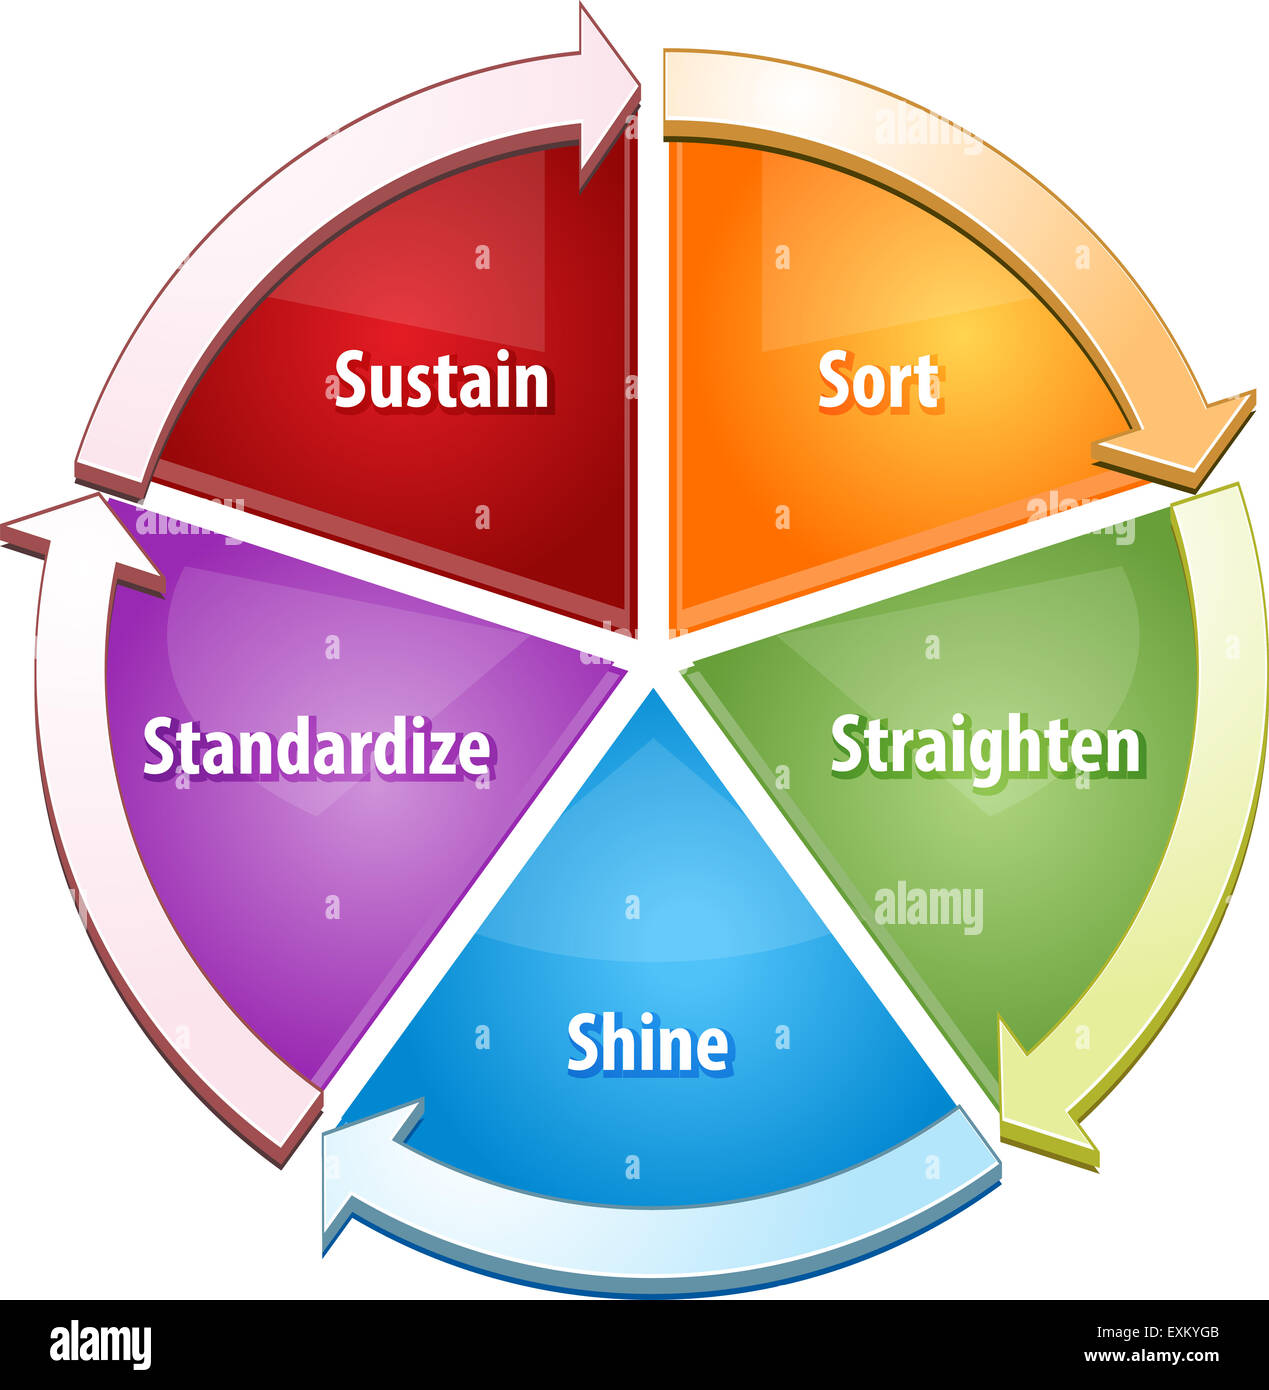 Business strategy concept infographic diagram illustration of 5S concept sort straighten shine standardize sustain Stock Photo